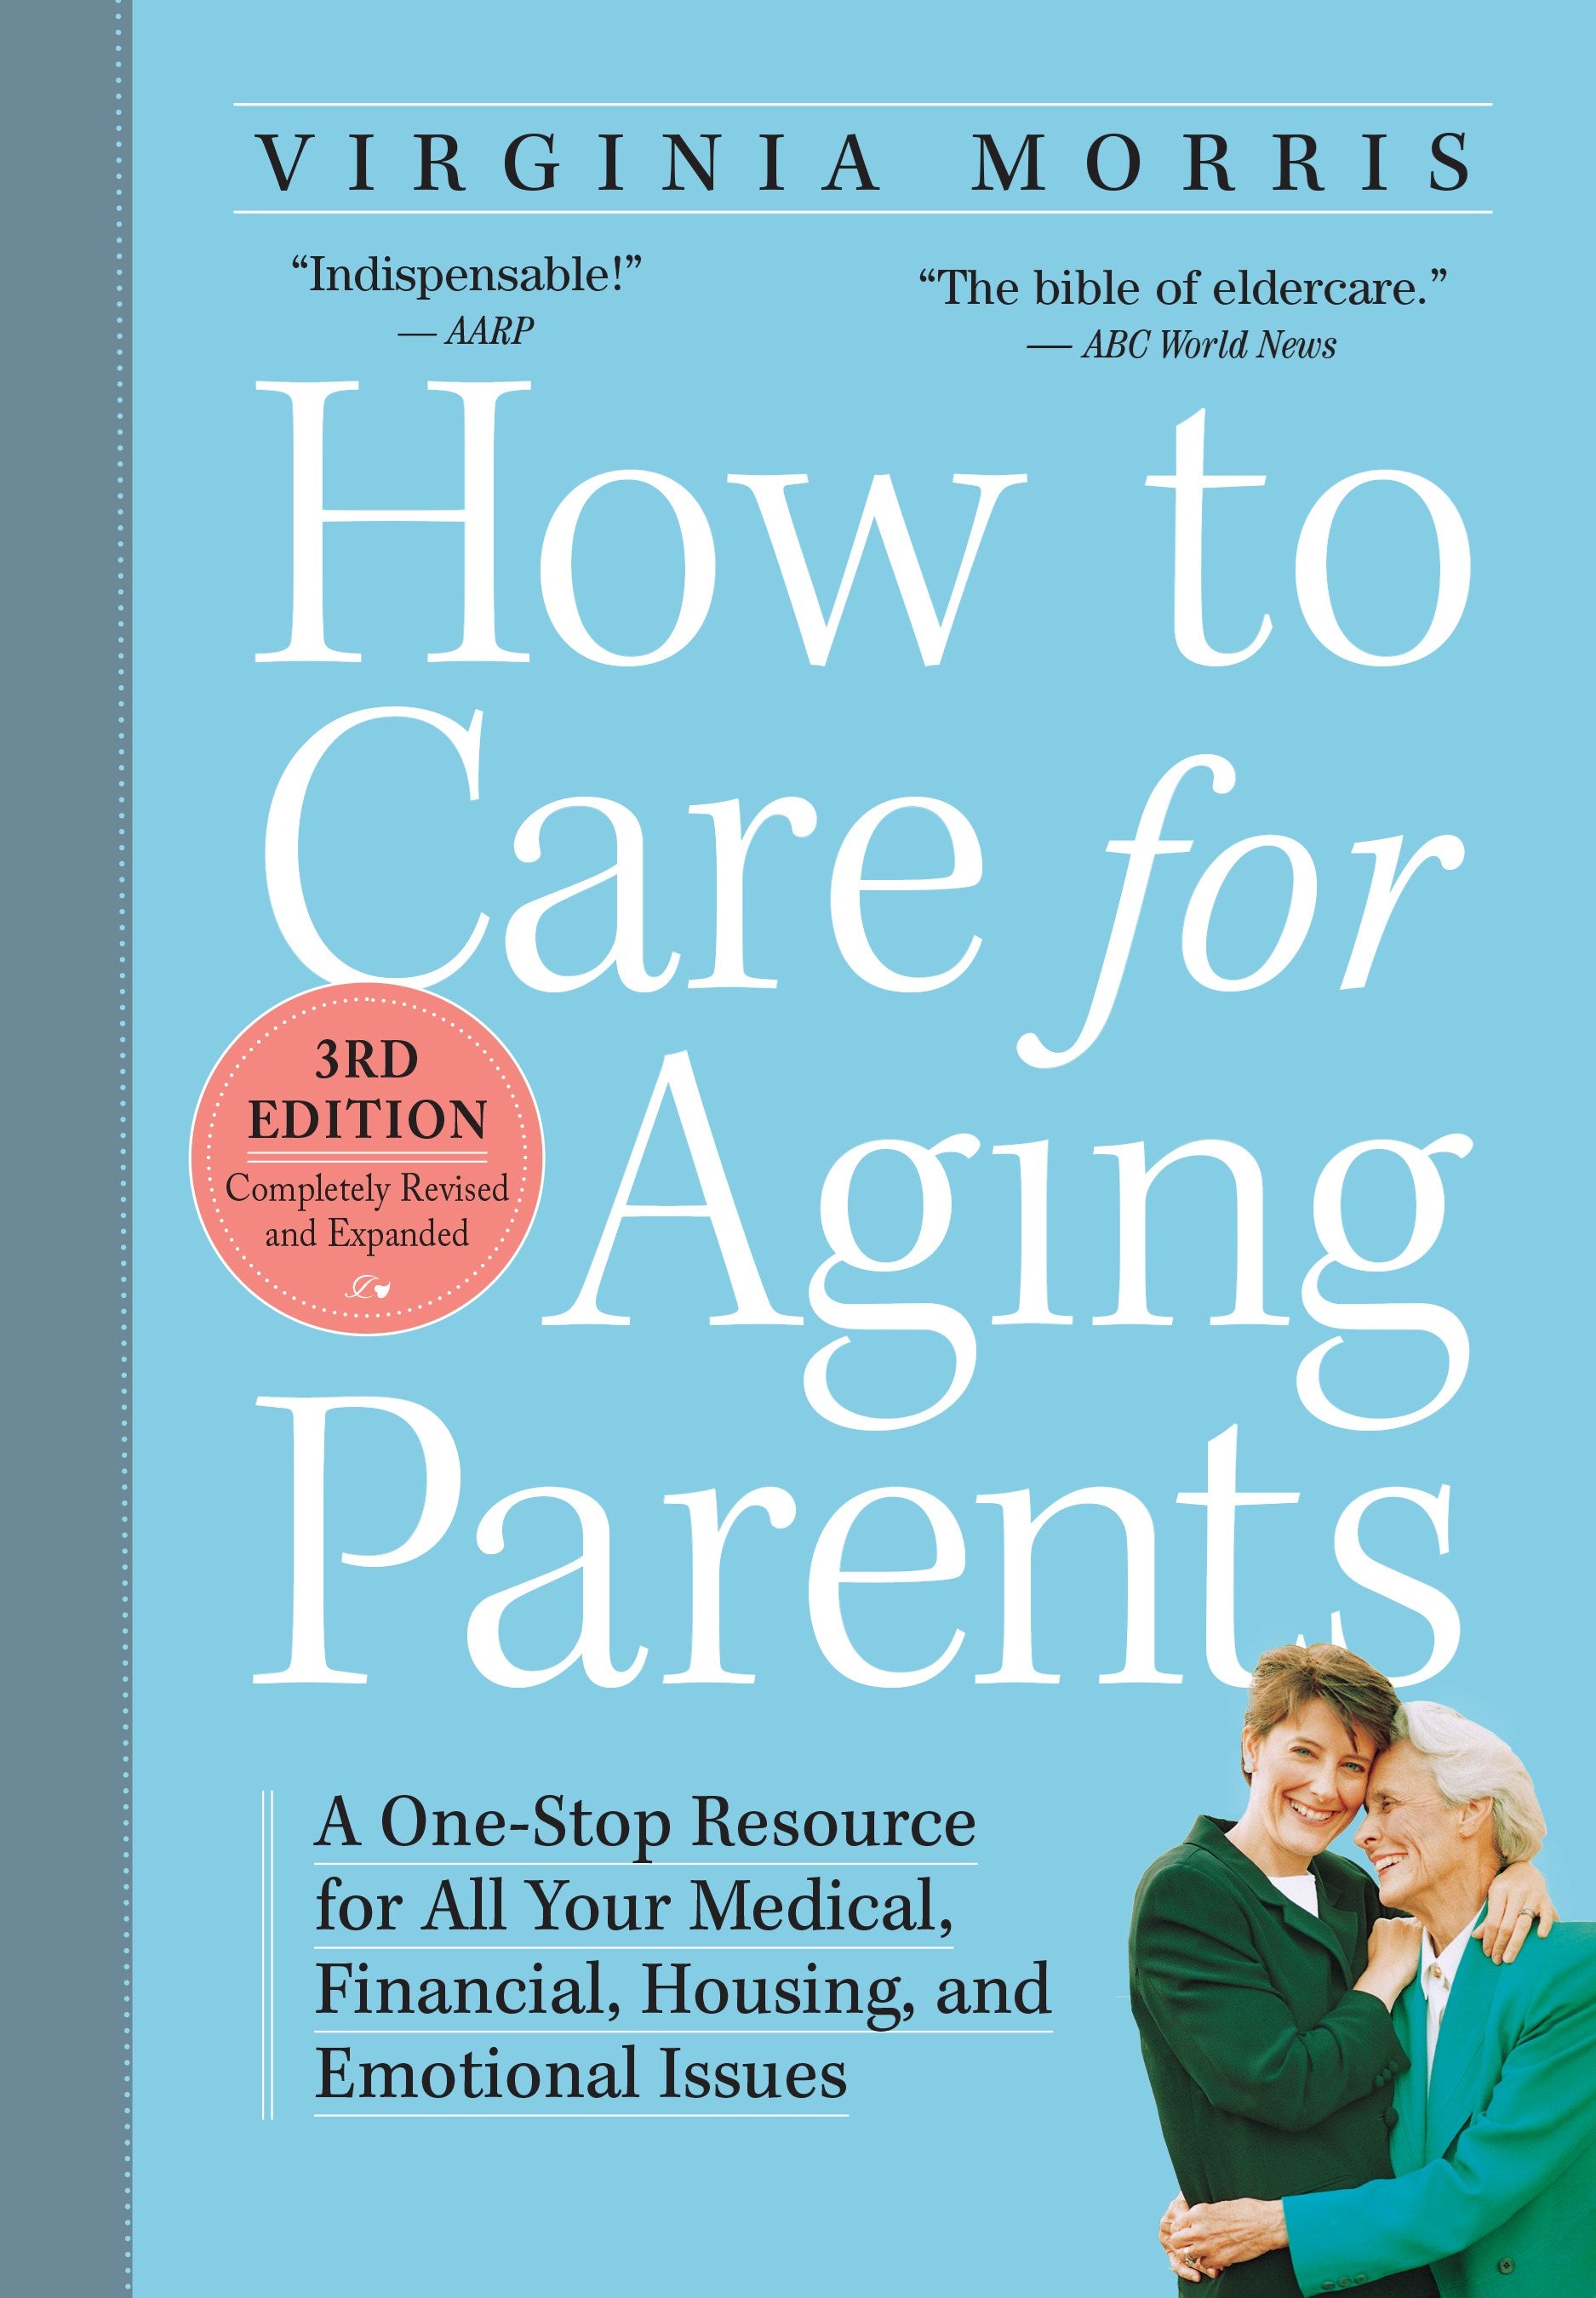 How to Care for Aging Parents, 3rd Edition: A One-Stop Resource for All Your Medical, Financial, Housing, and Emotional Issues (3rd Edition)